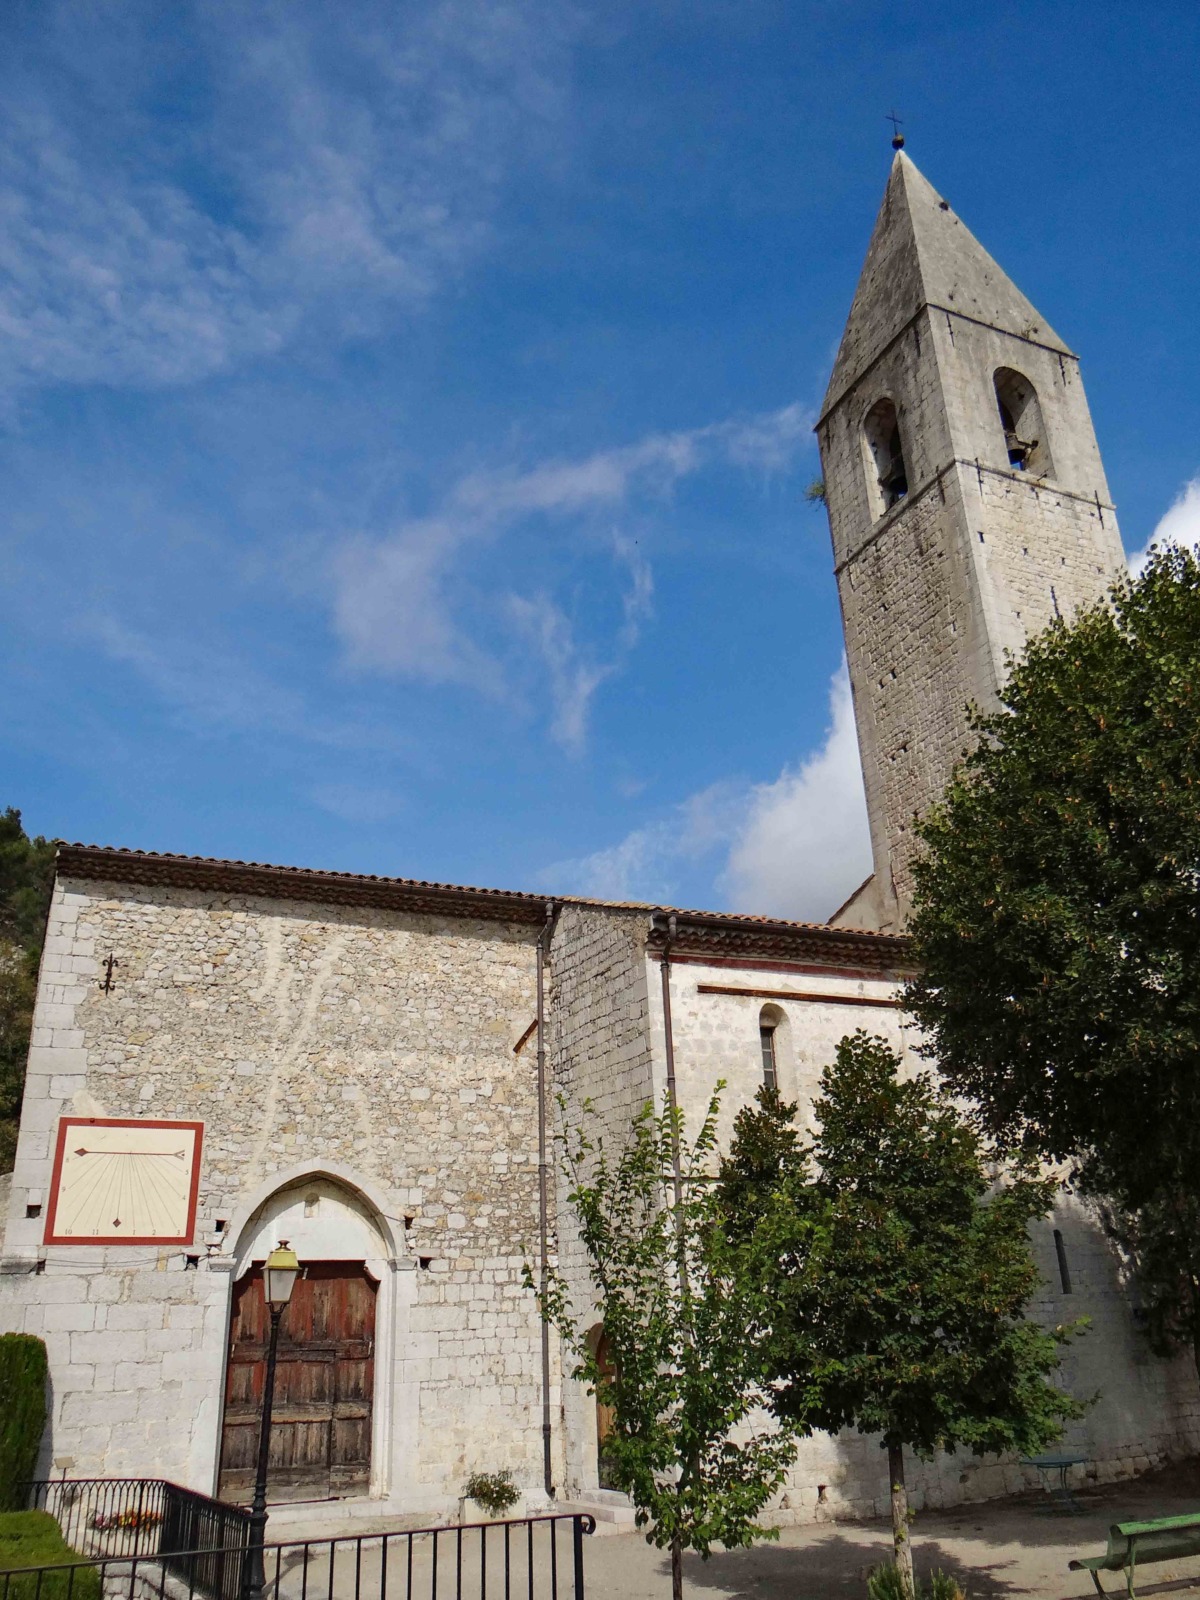 The church of Sainte-Marie de l'Assomption © Mossot - licence [CC BY-SA 3.0] from Wikimedia Commons